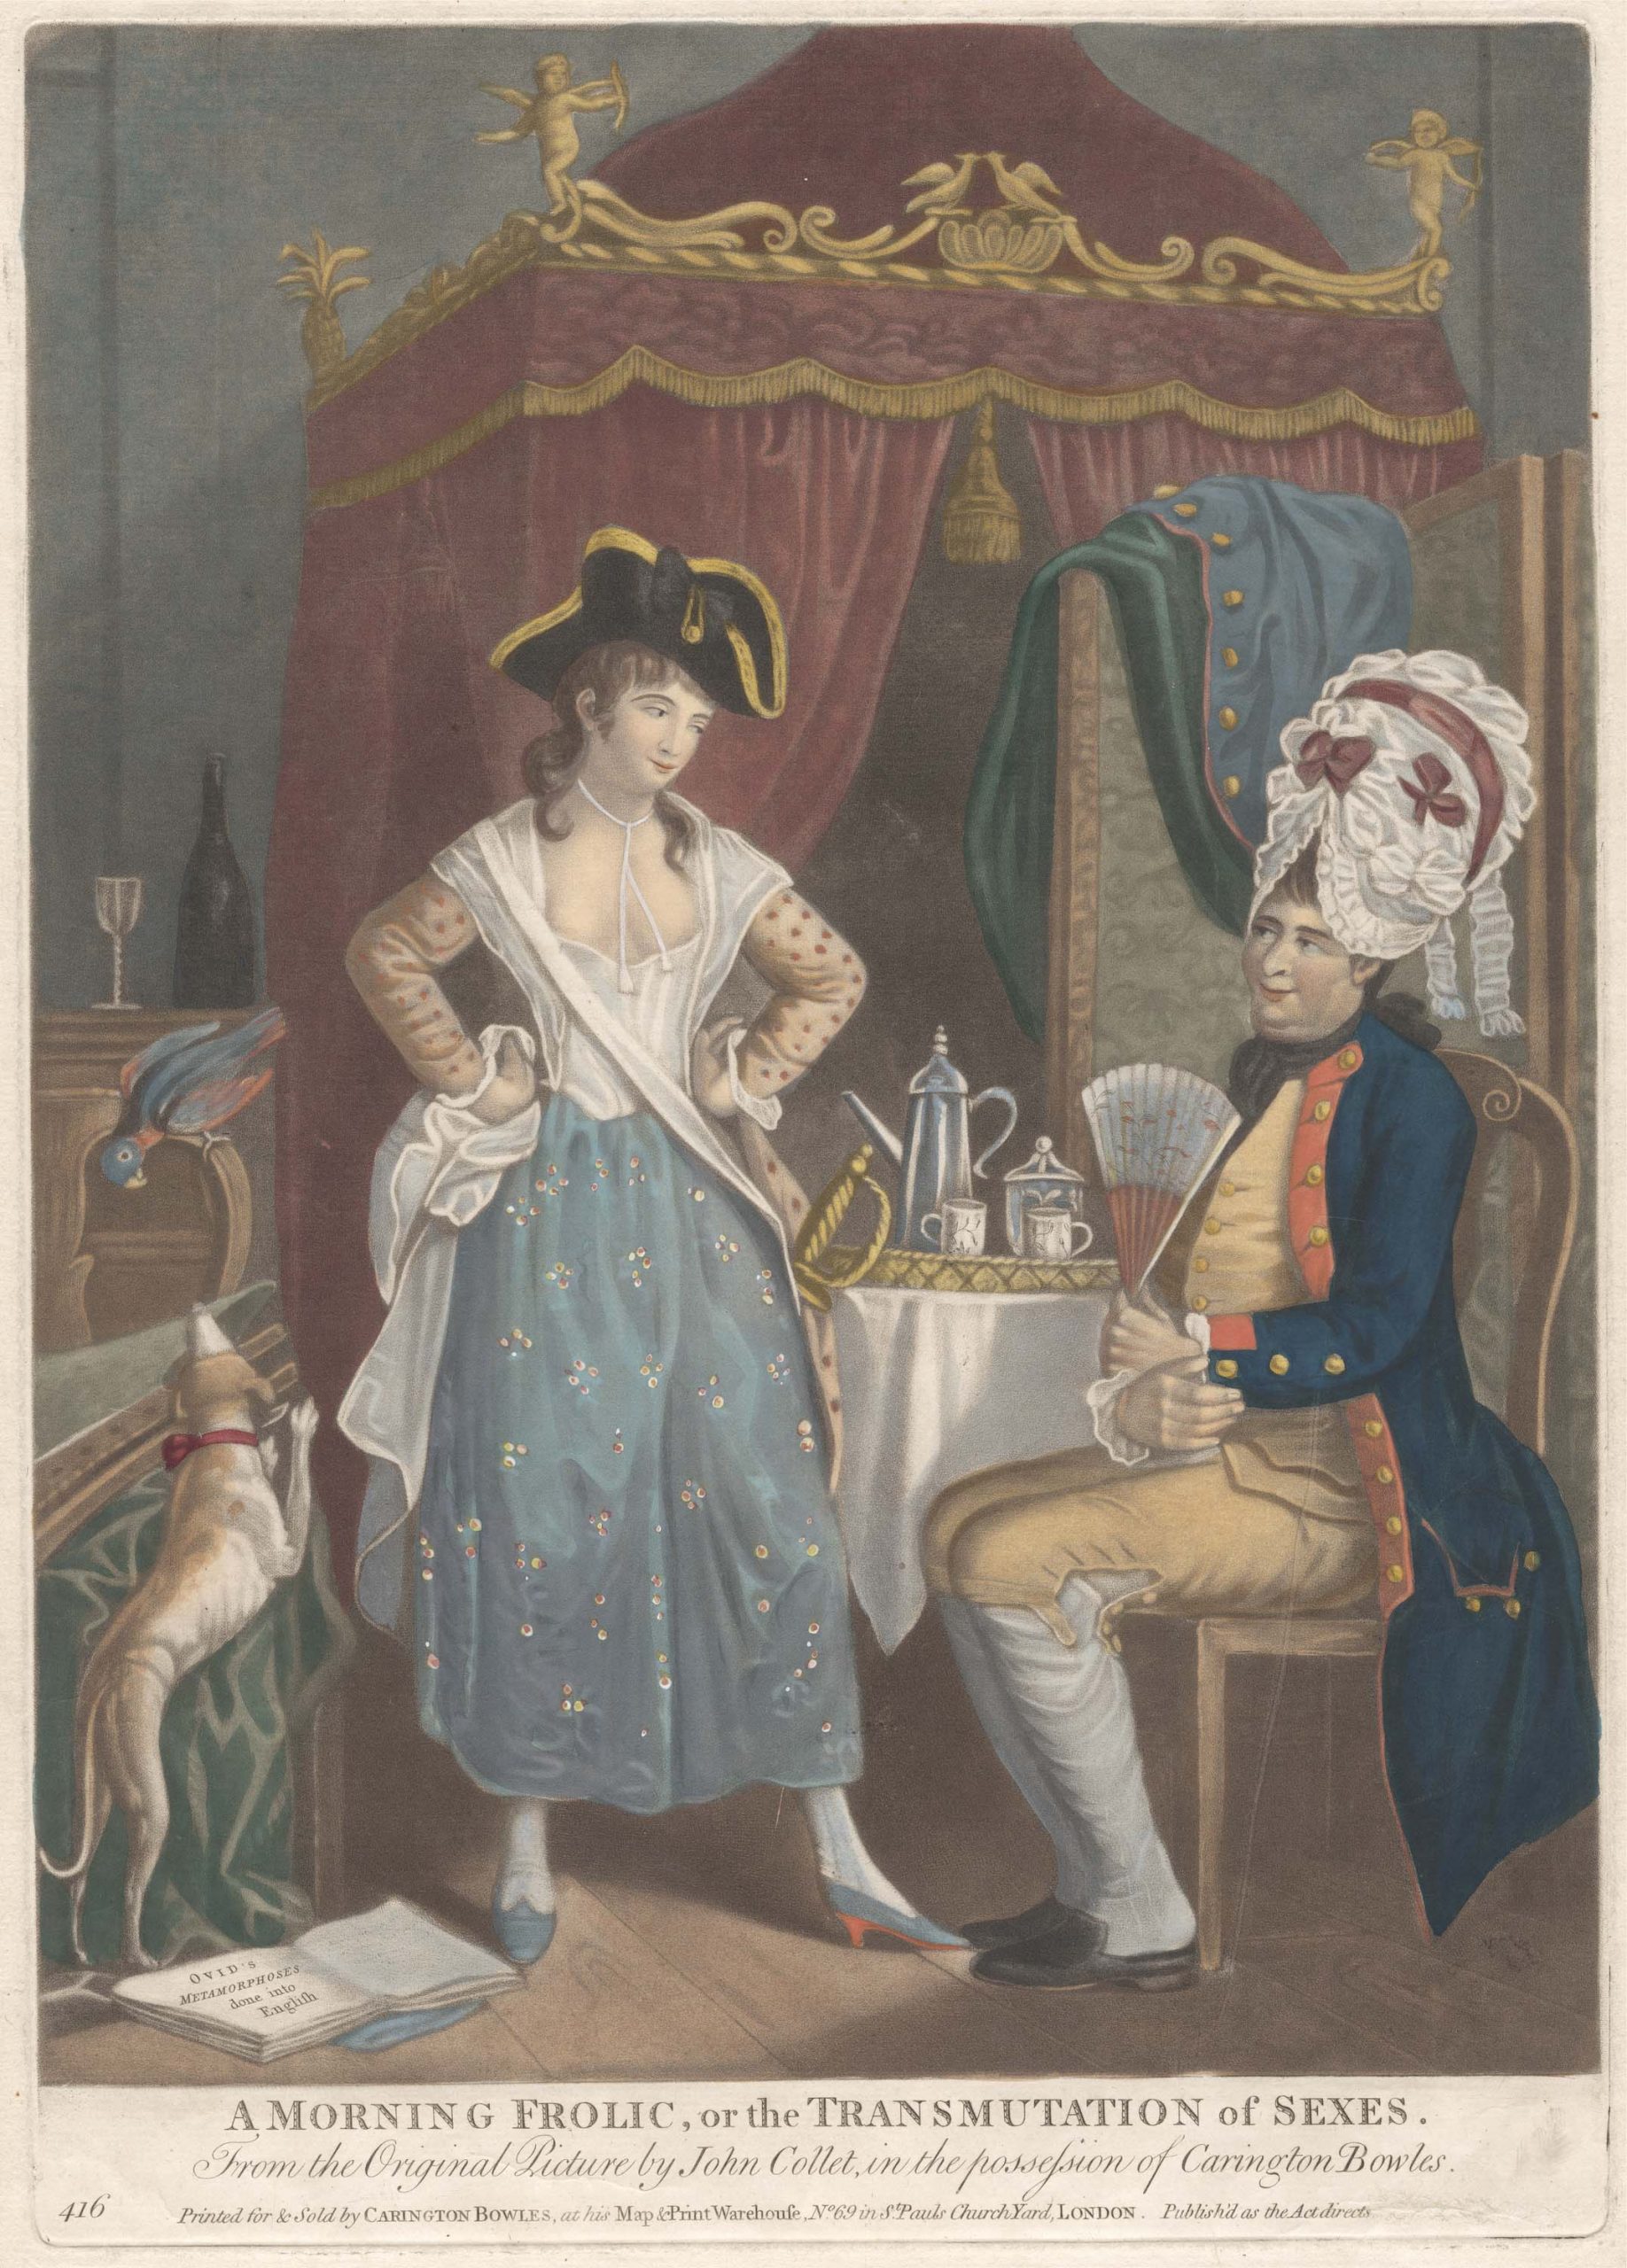 An old illustration of a man and woman swapping hats in the 1700s.